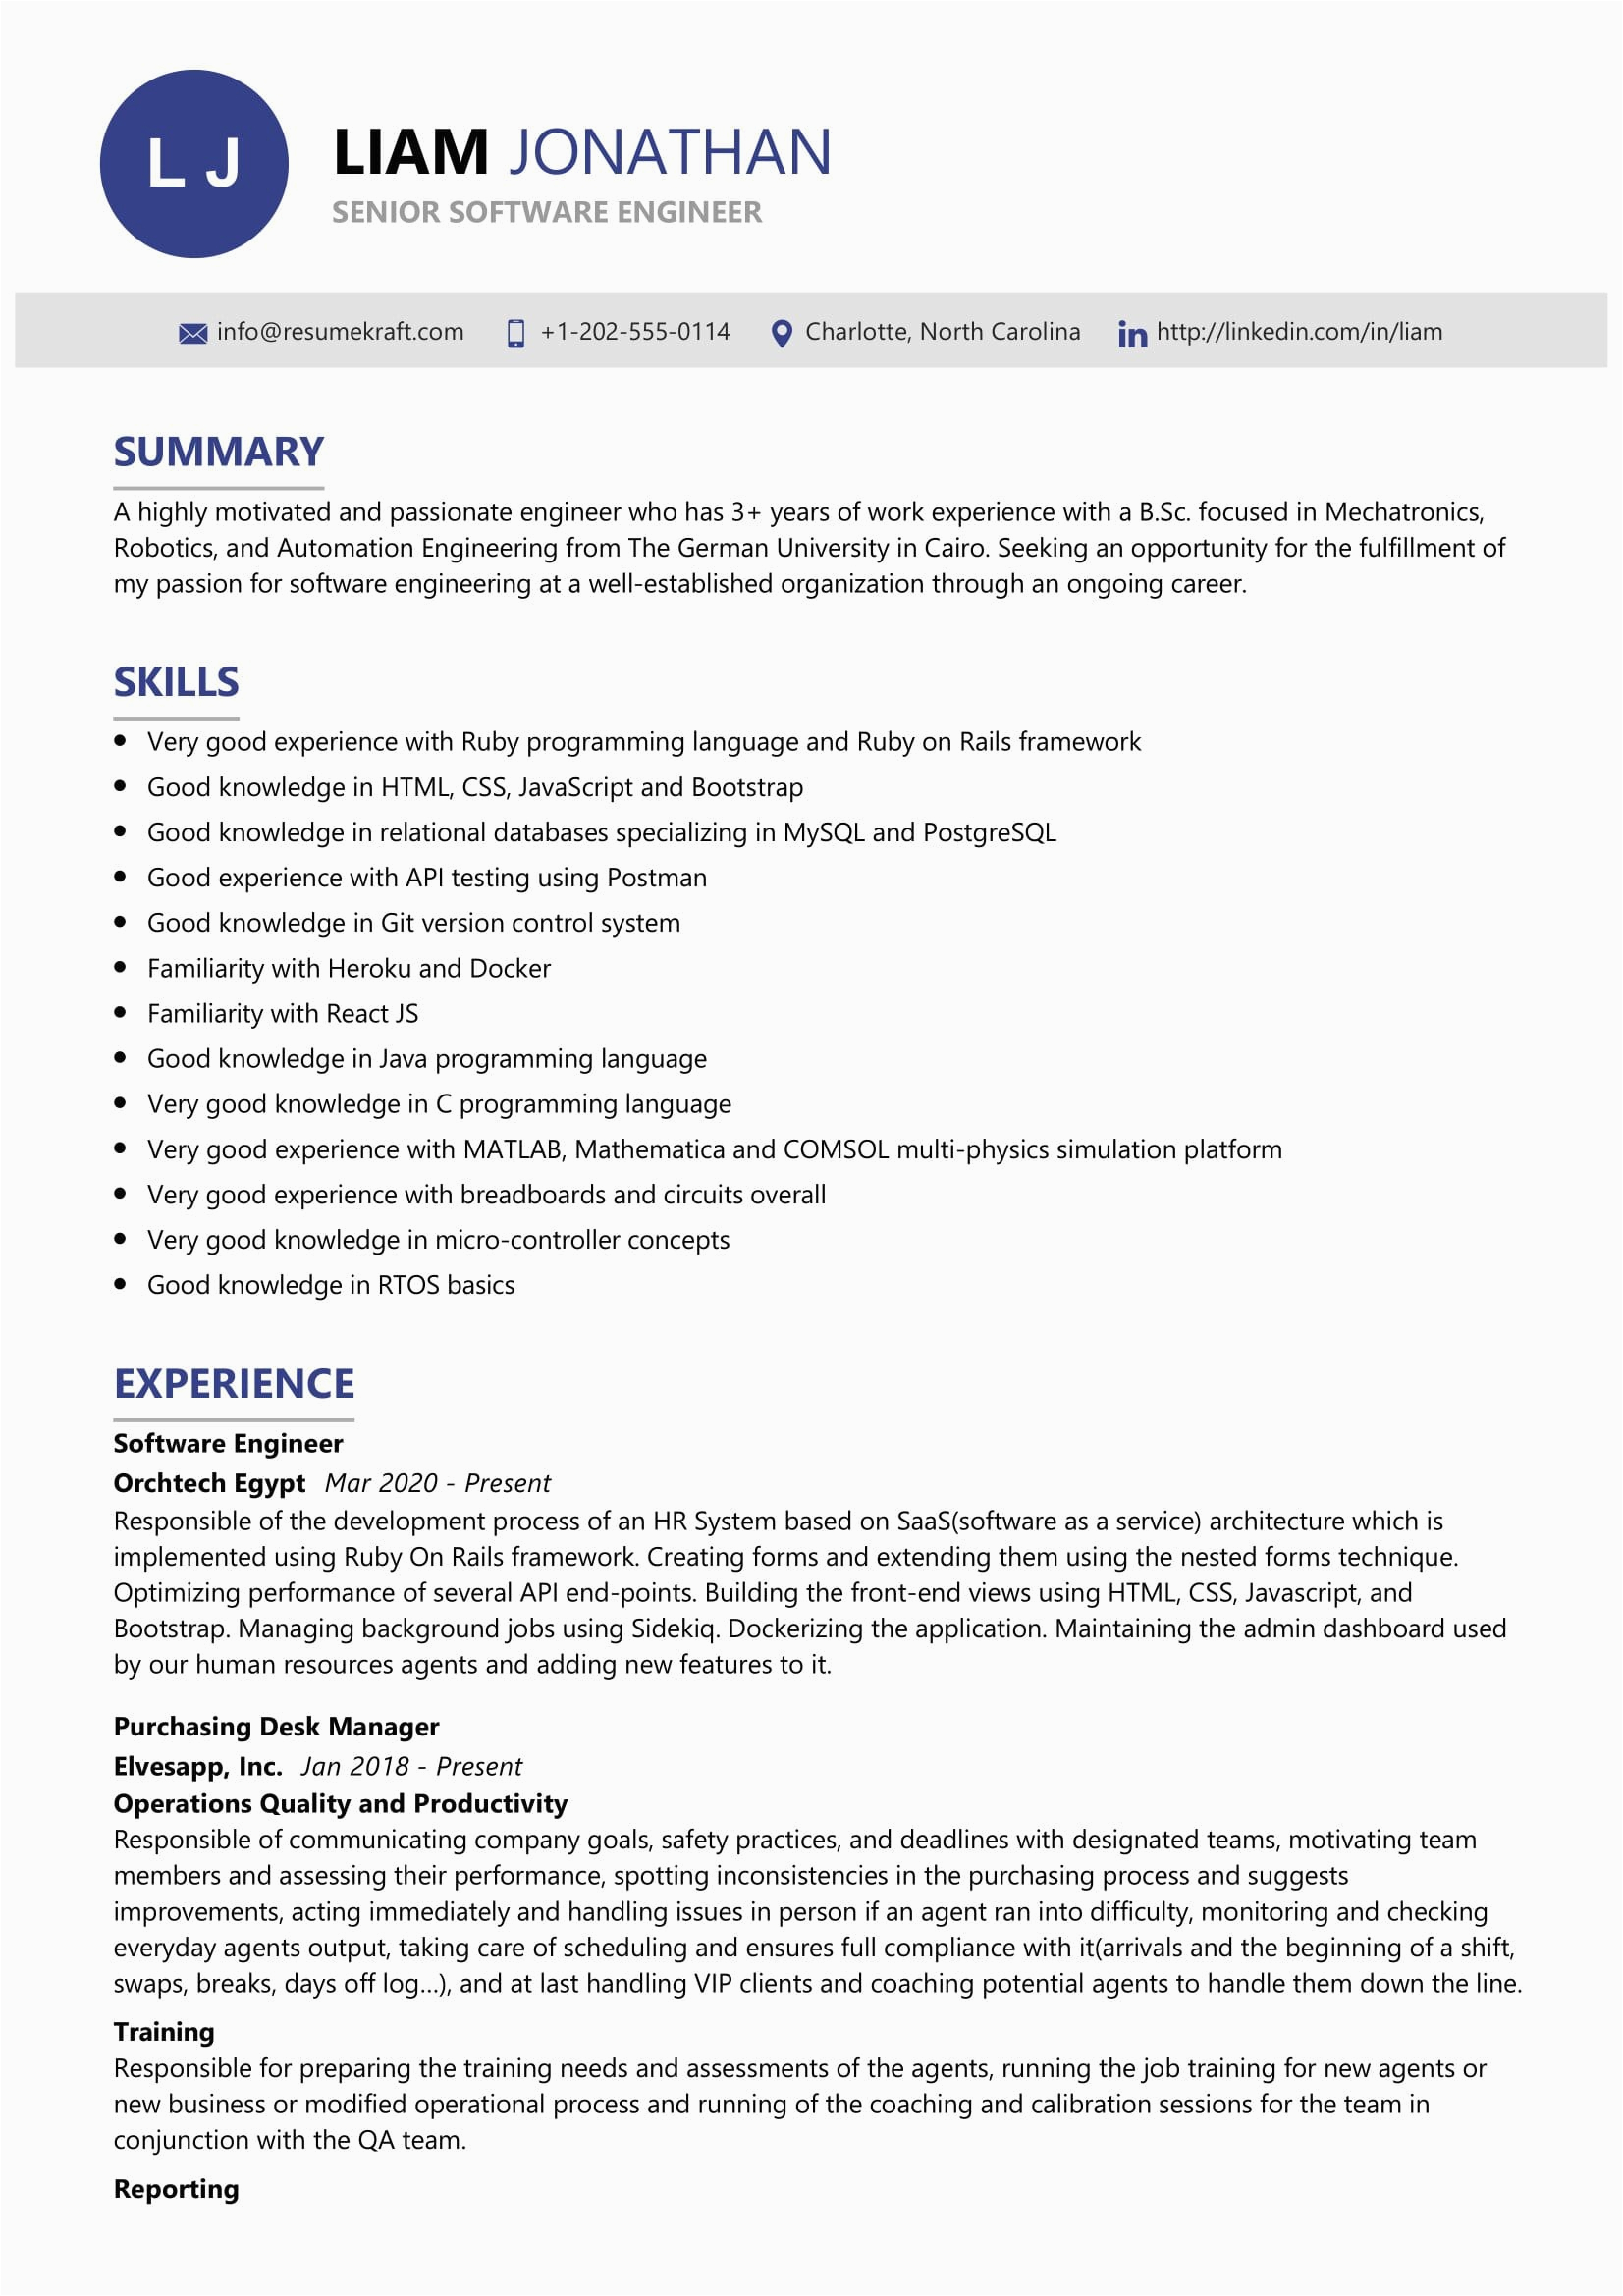 Professional Resume Samples for software Engineers Senior software Engineer Resume Sample 2021